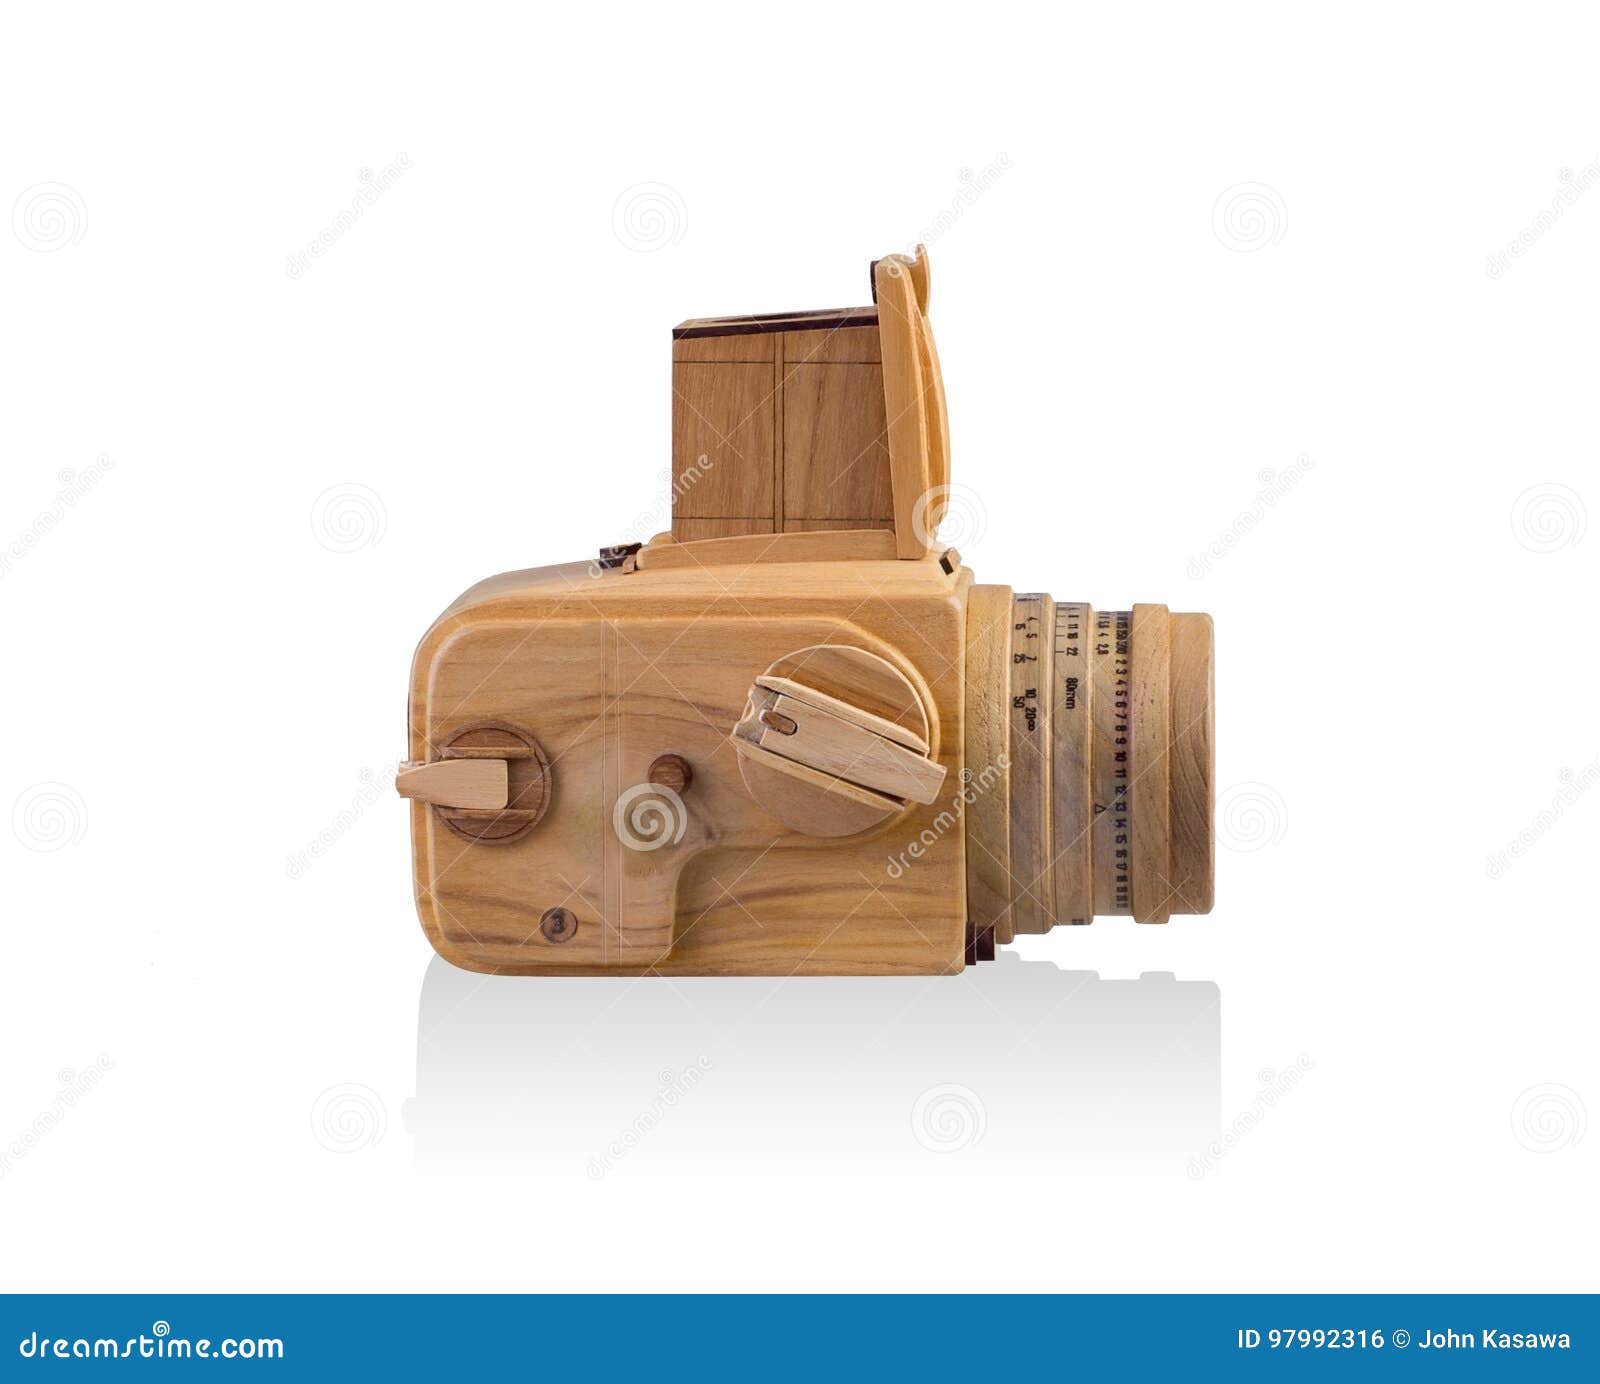 Wooden Camera isolated. Wooden classic handmade camera isolated on white